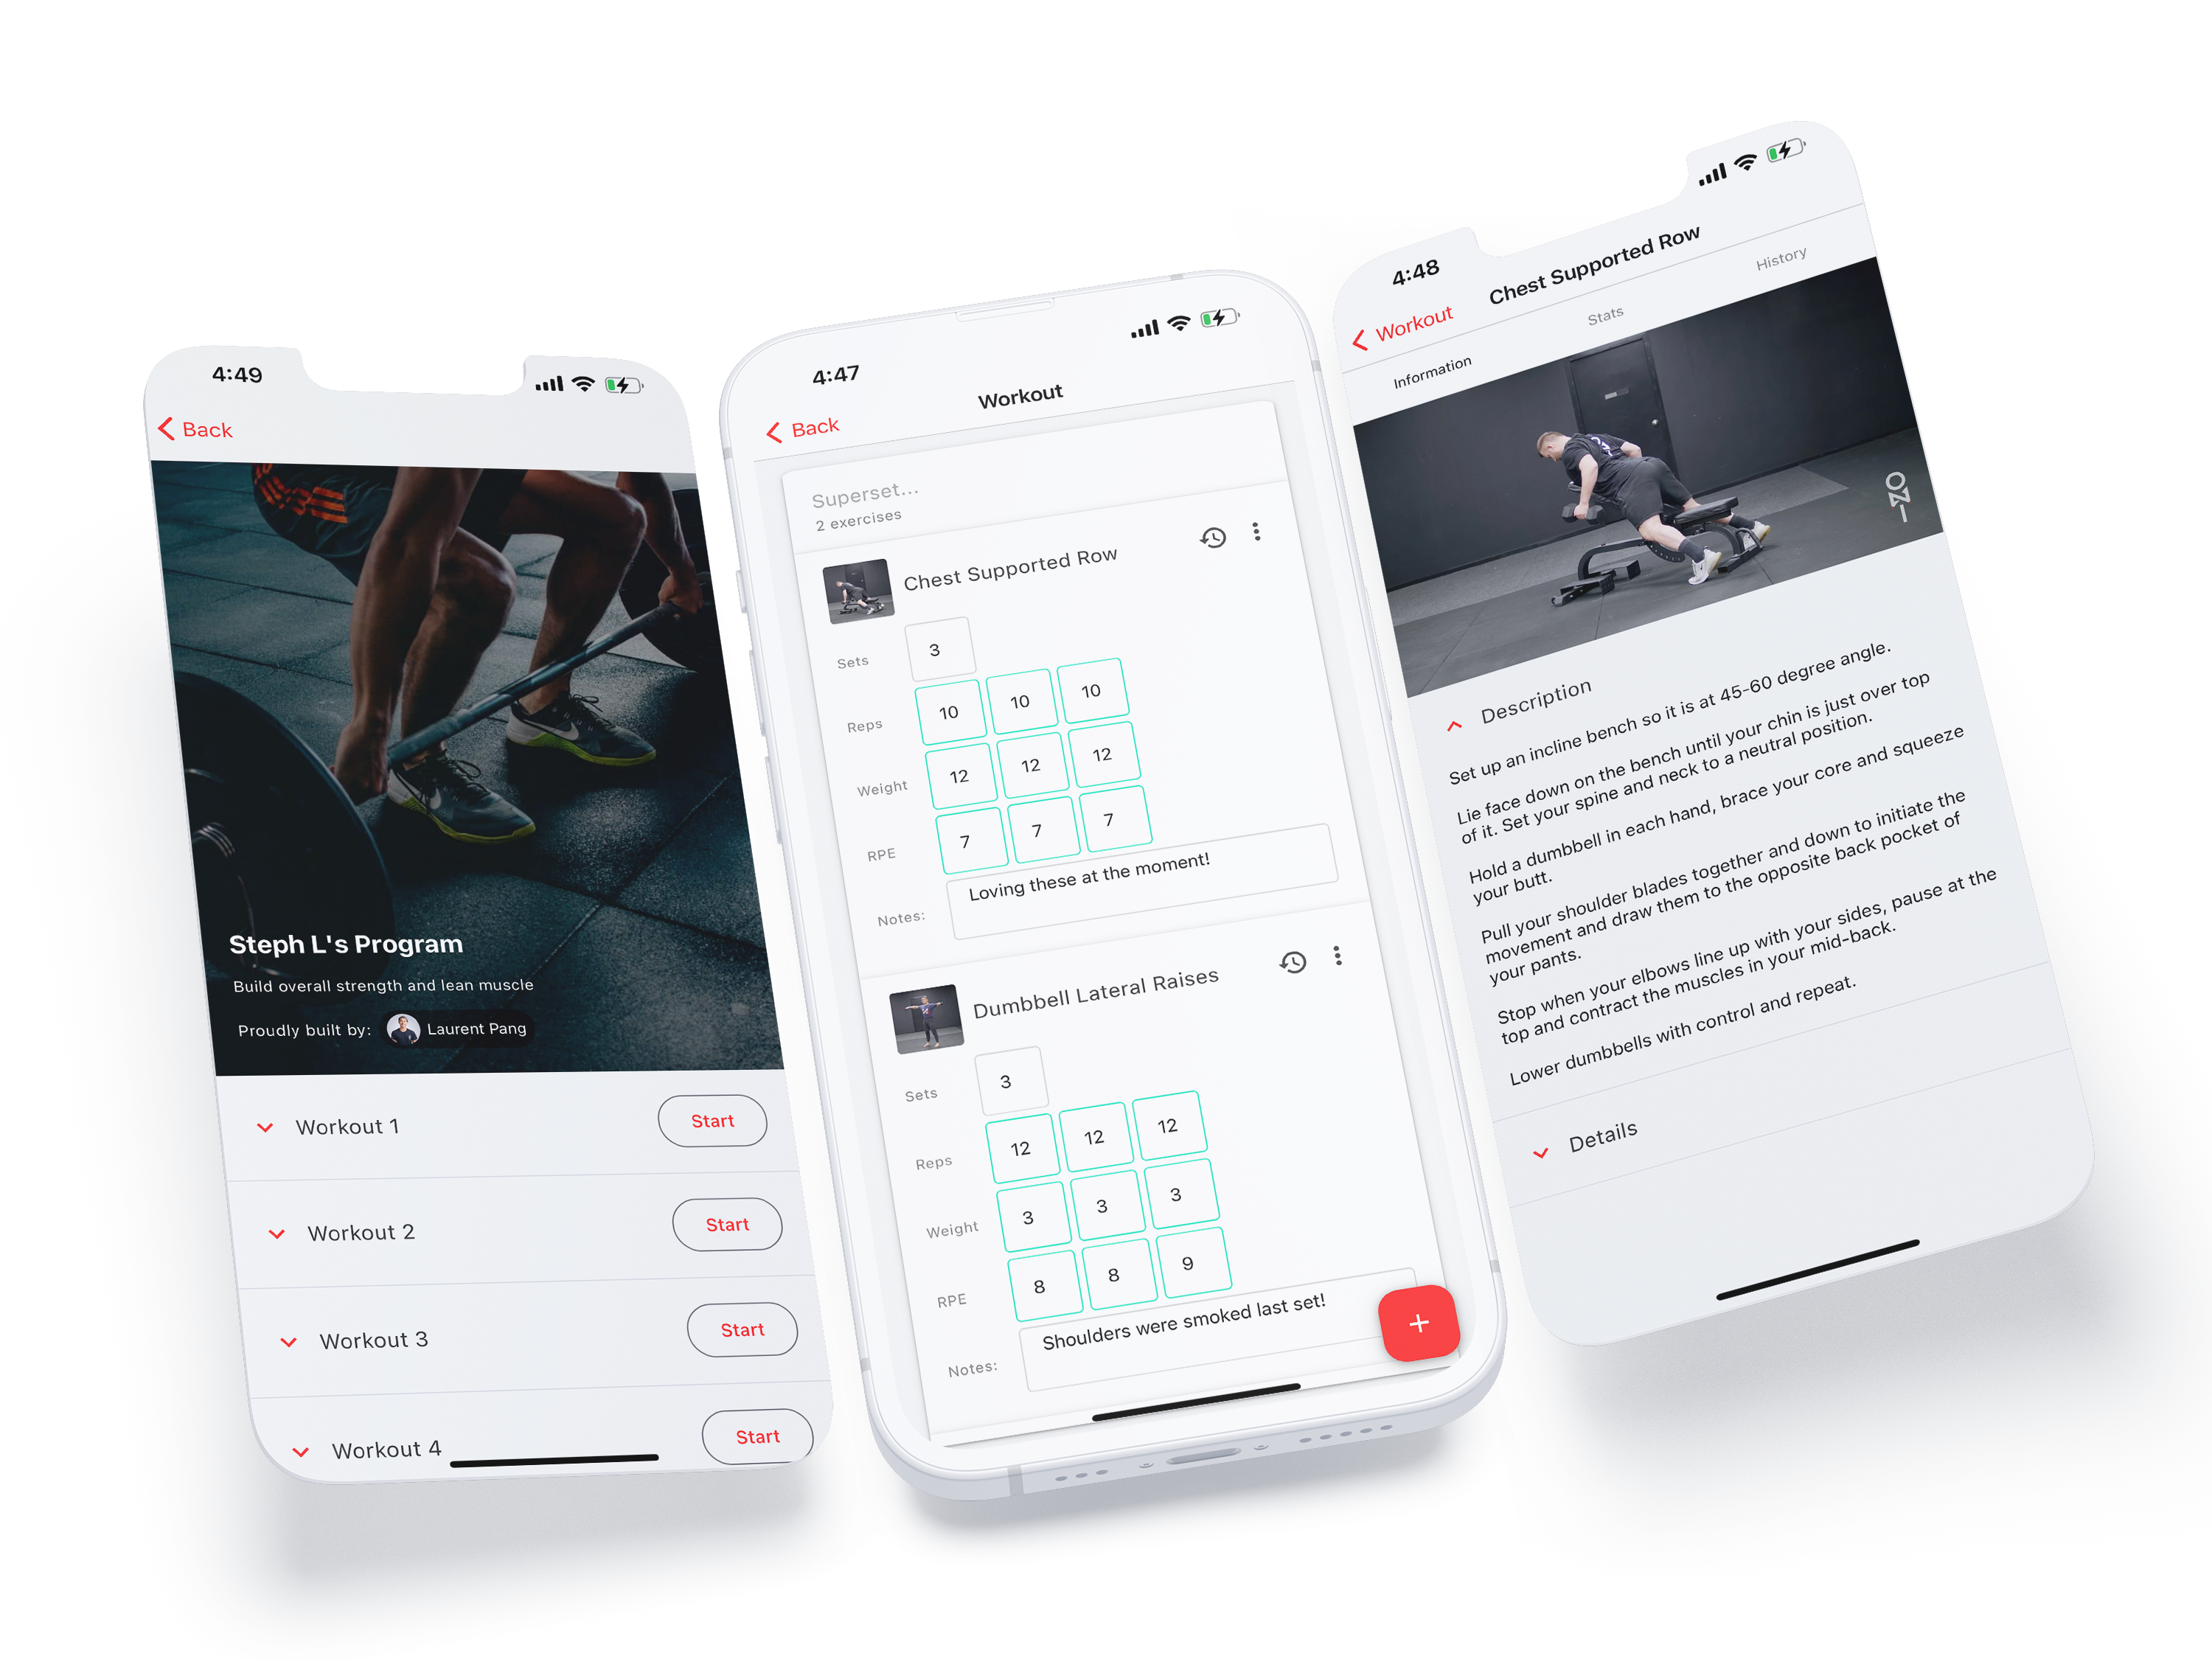 Workouts are easy to follow on a mobile app for your clients with exercise videos, descriptions, and other personalisations - all customisable by you.